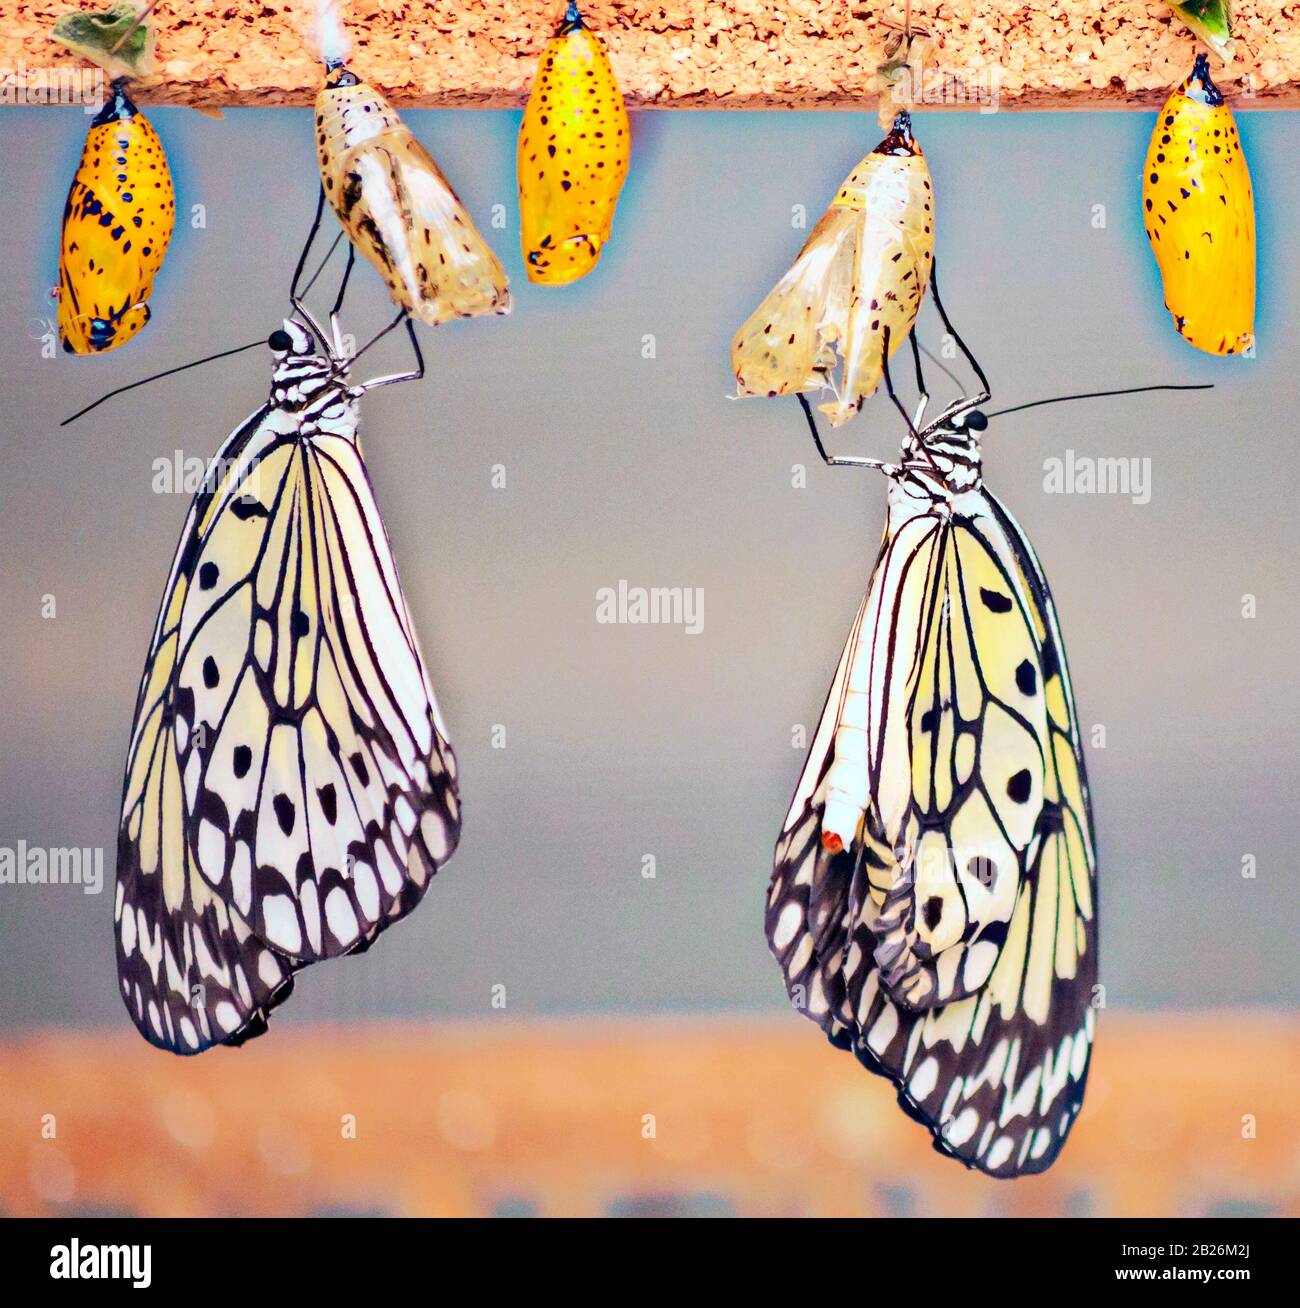 Butterflies surrounded by blurred background Stock Photo